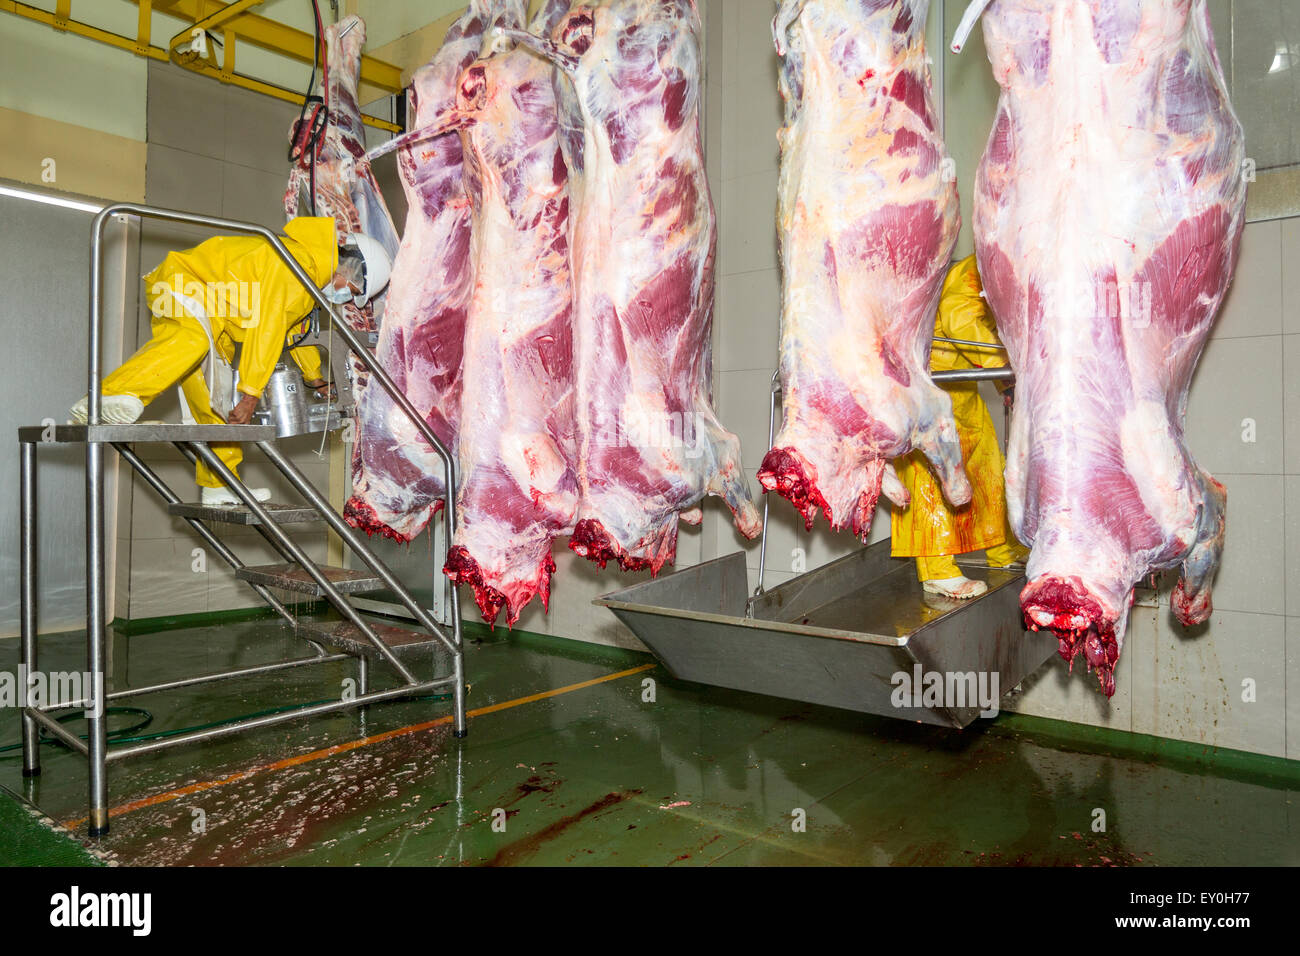 Food Industry Slaughterhouse Cow Production Line Workers Cutting And Splitting Animal Carcasses Stock Photo